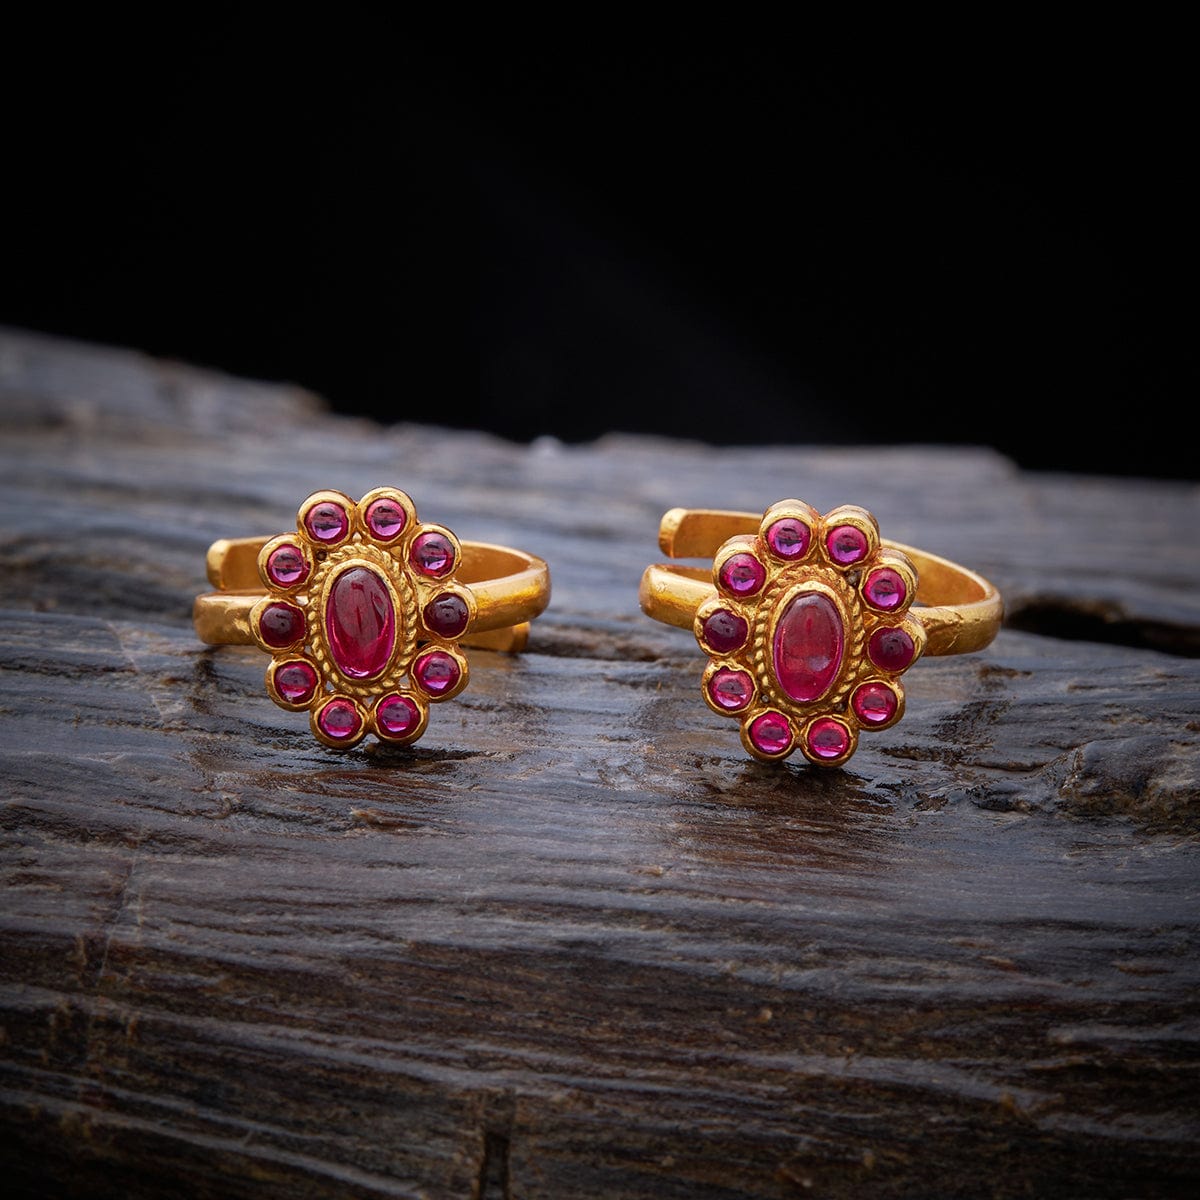 Ethnic and Fancy Toe Ring Designs | Starting at ₹330 – Kushal's ...